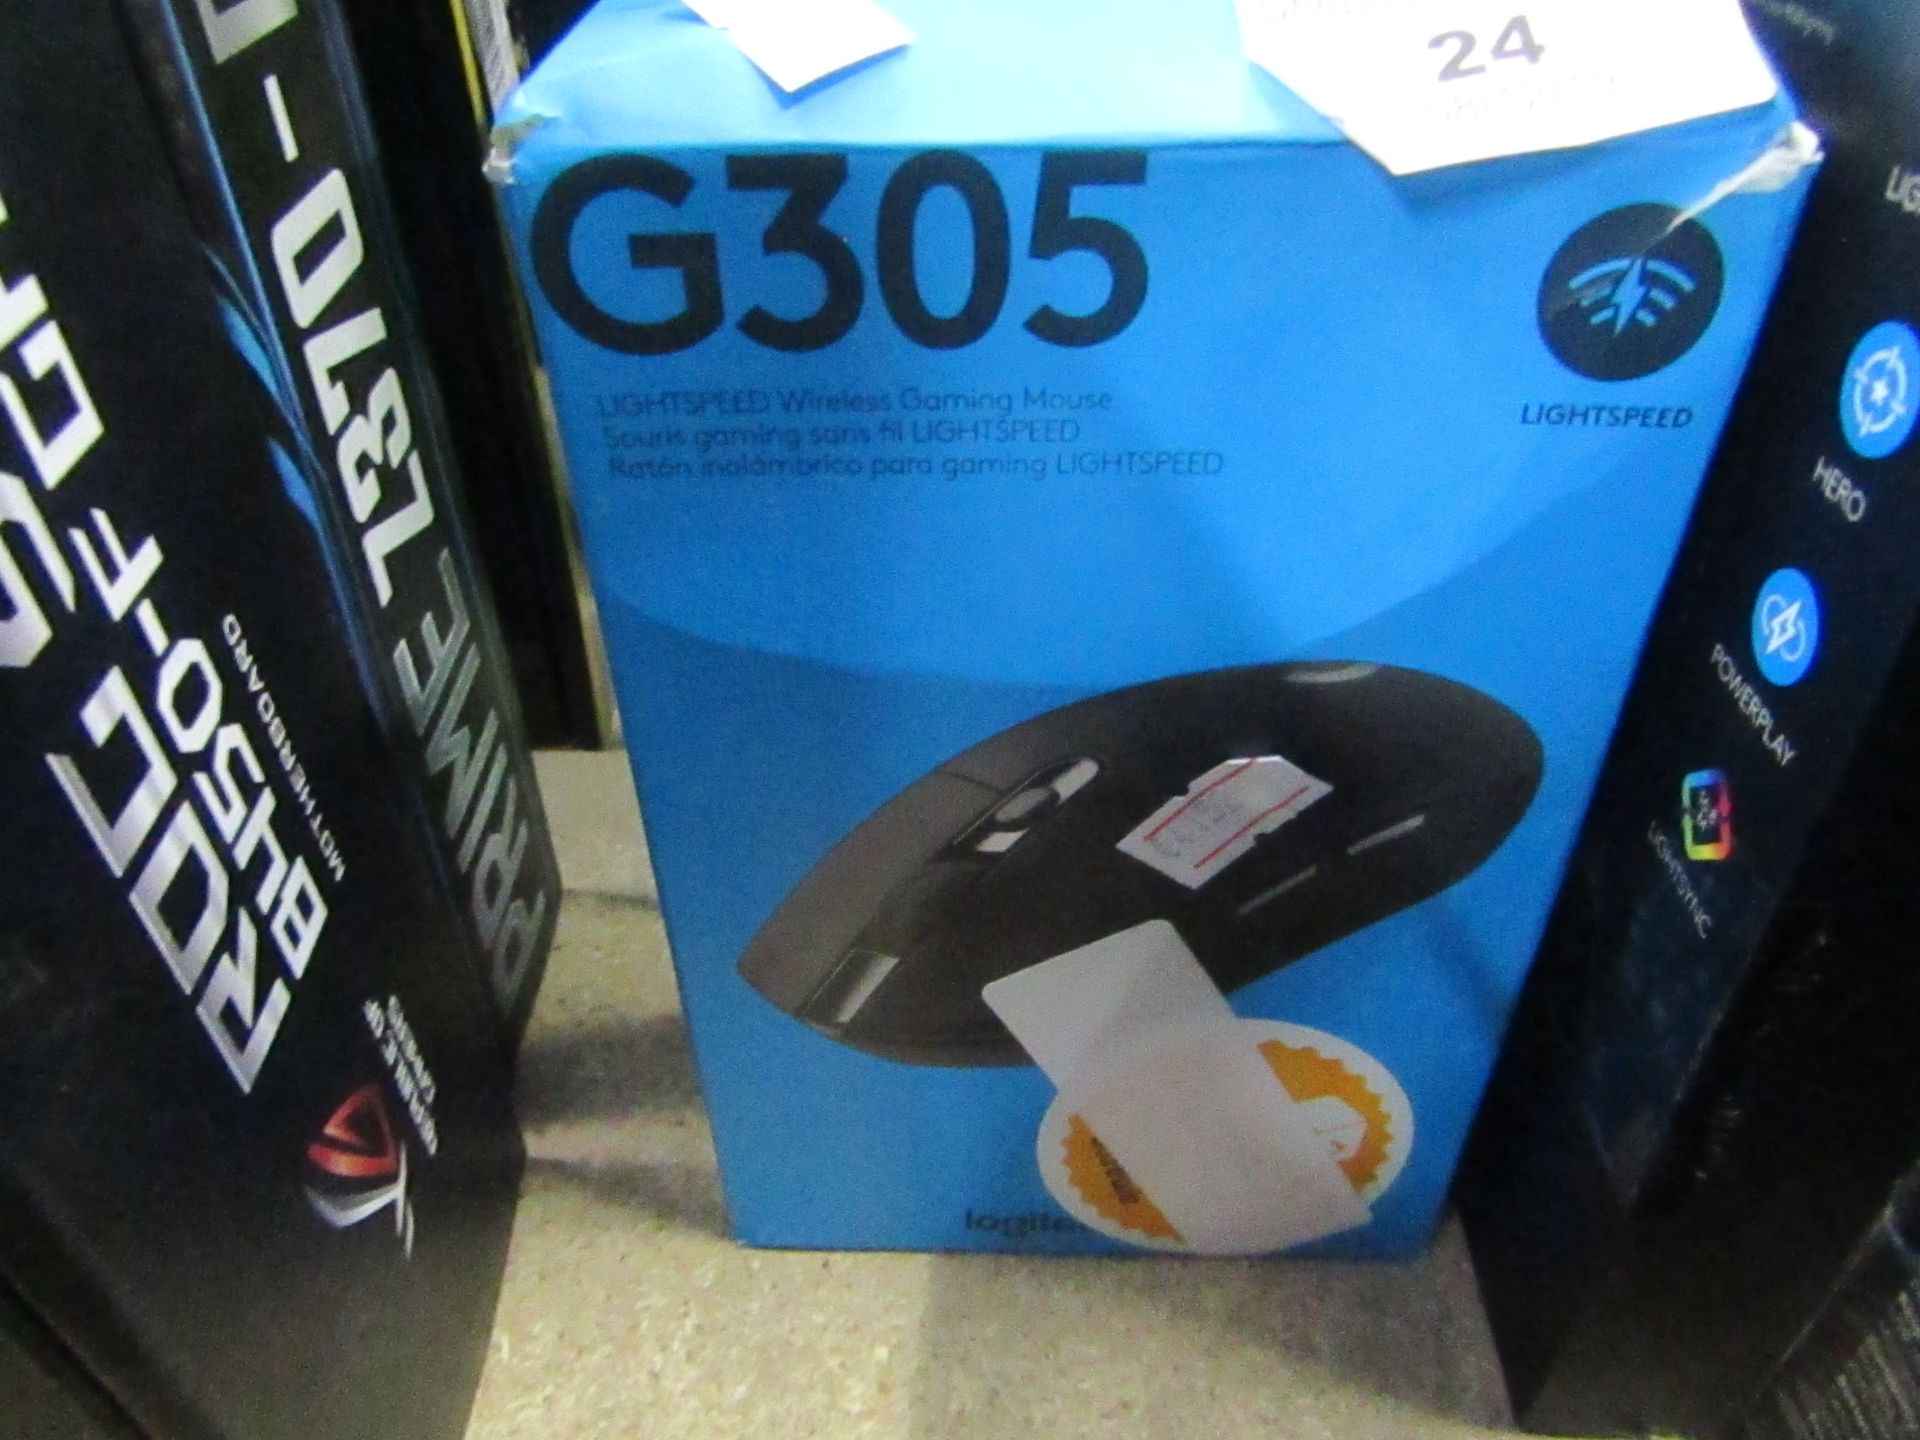 Logitech G305 Lightspeed gaming mouse, untested and boxed.